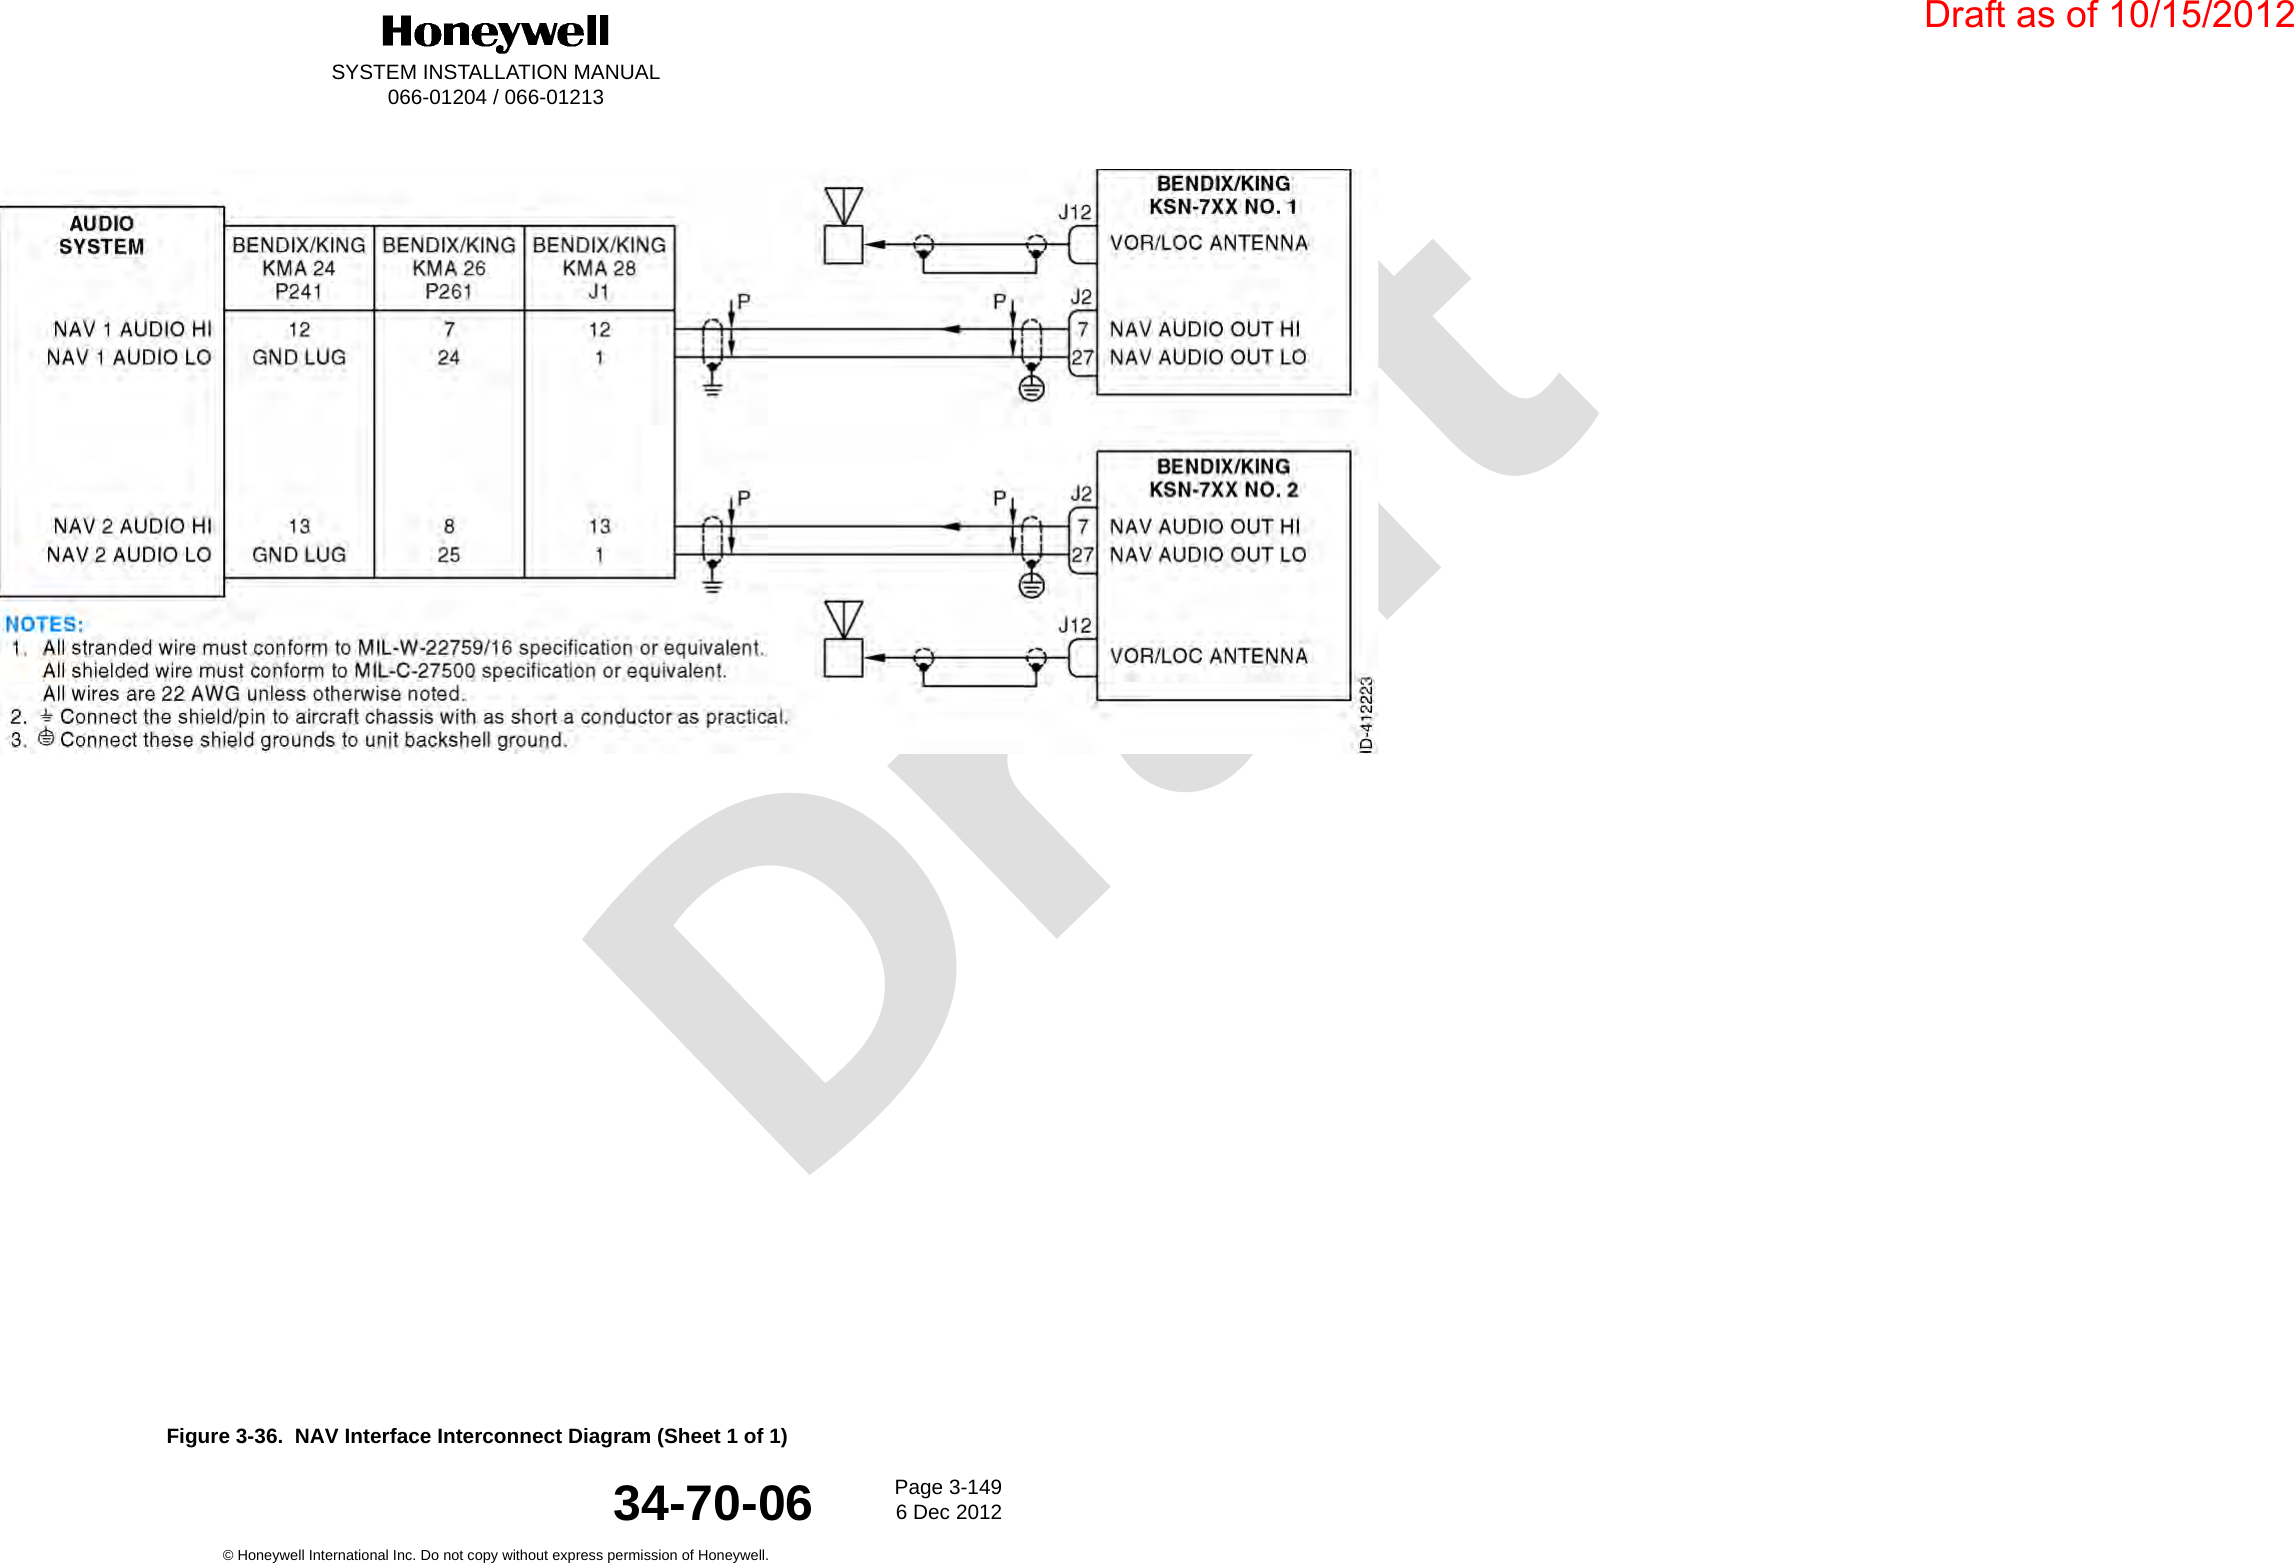 DraftSYSTEM INSTALLATION MANUAL066-01204 / 066-01213Page 3-1496 Dec 2012© Honeywell International Inc. Do not copy without express permission of Honeywell.34-70-06Figure 3-36.  NAV Interface Interconnect Diagram (Sheet 1 of 1)Draft as of 10/15/2012